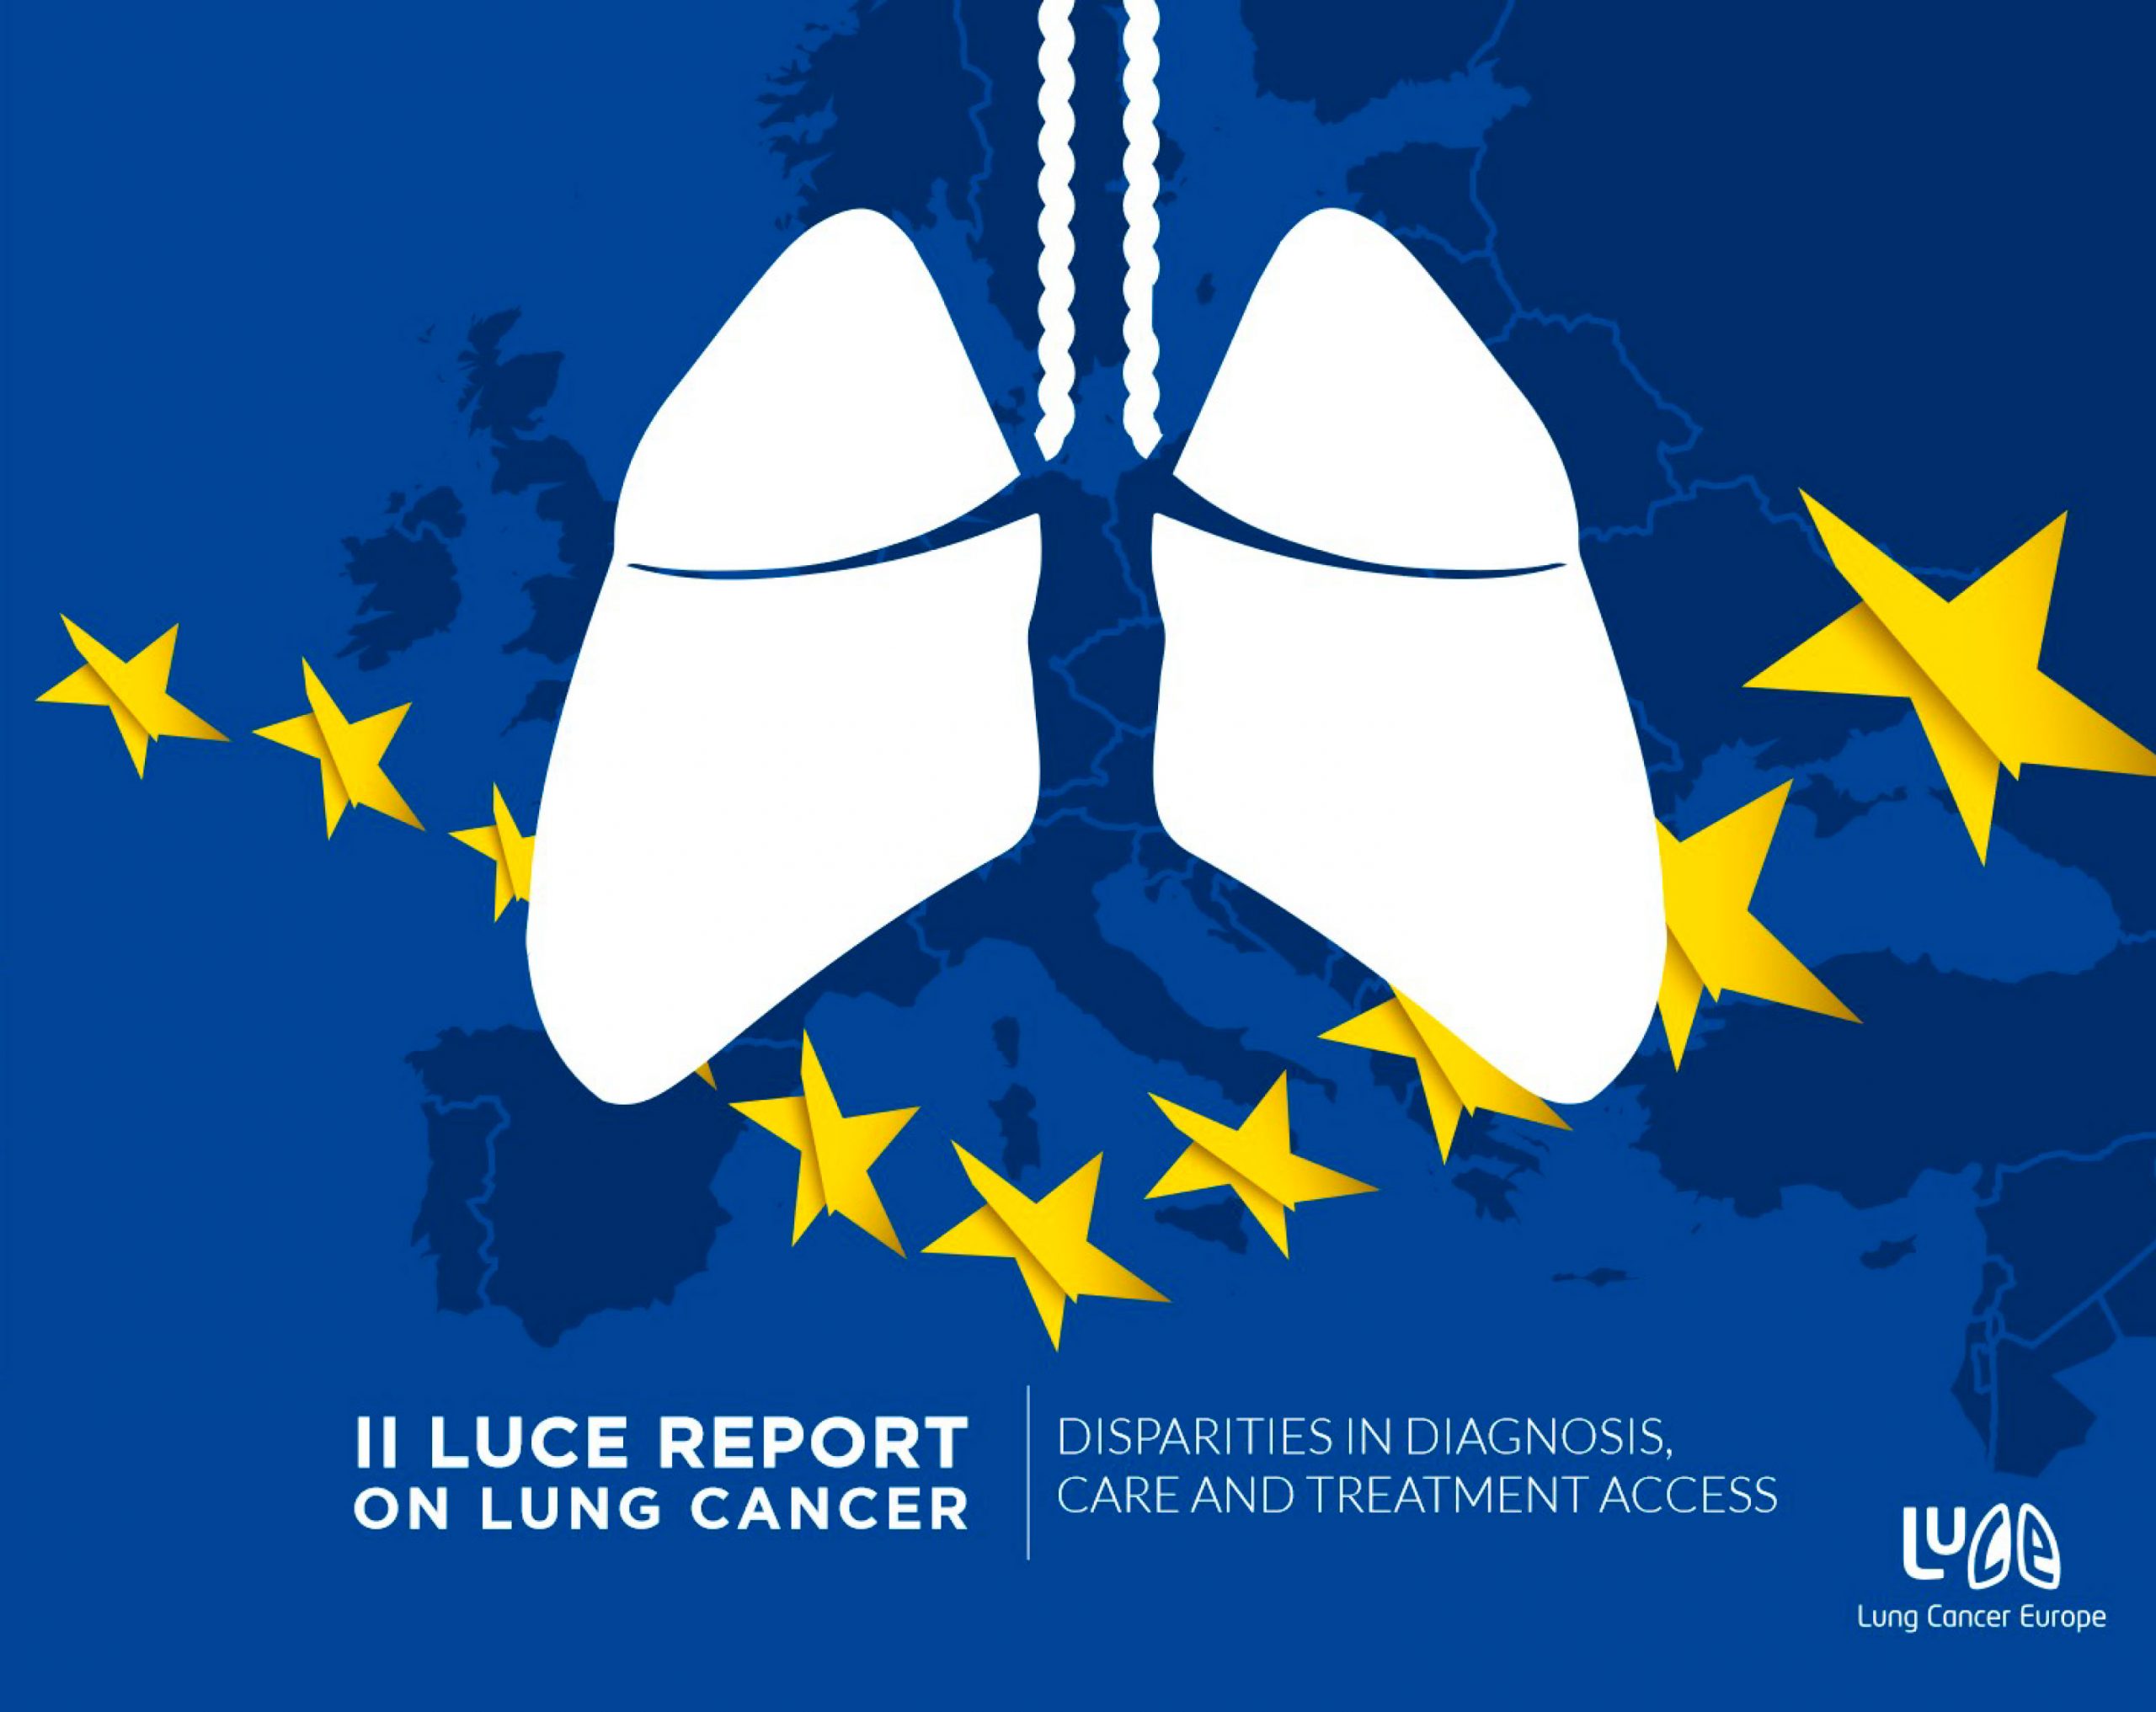 LUNG CANCER INEQUALITIES: PATIENT ADVOCATES AT THE EUROPEAN PARLIAMENT